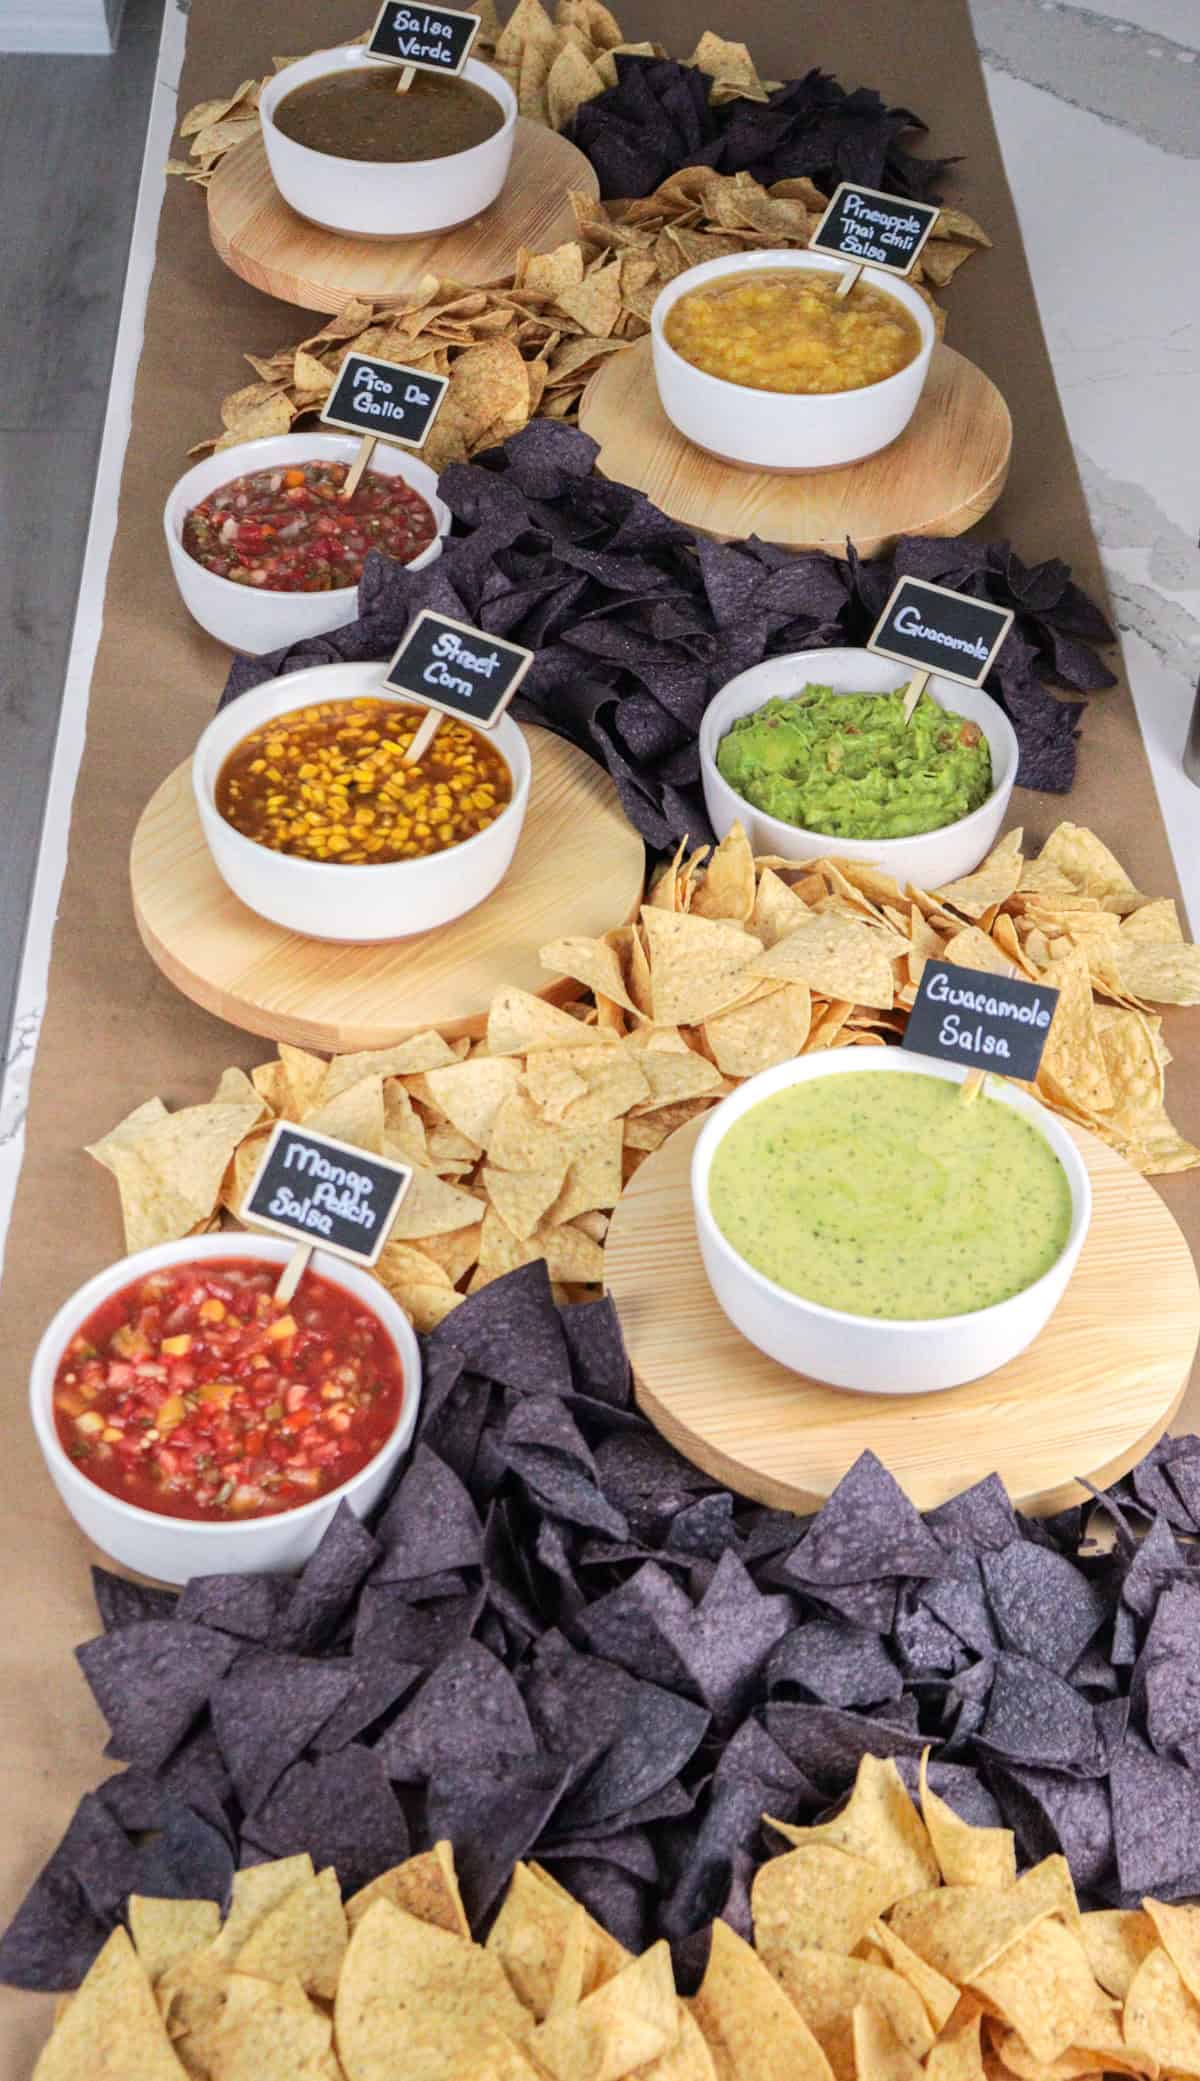 Chips and salsa laid out on table with signs.